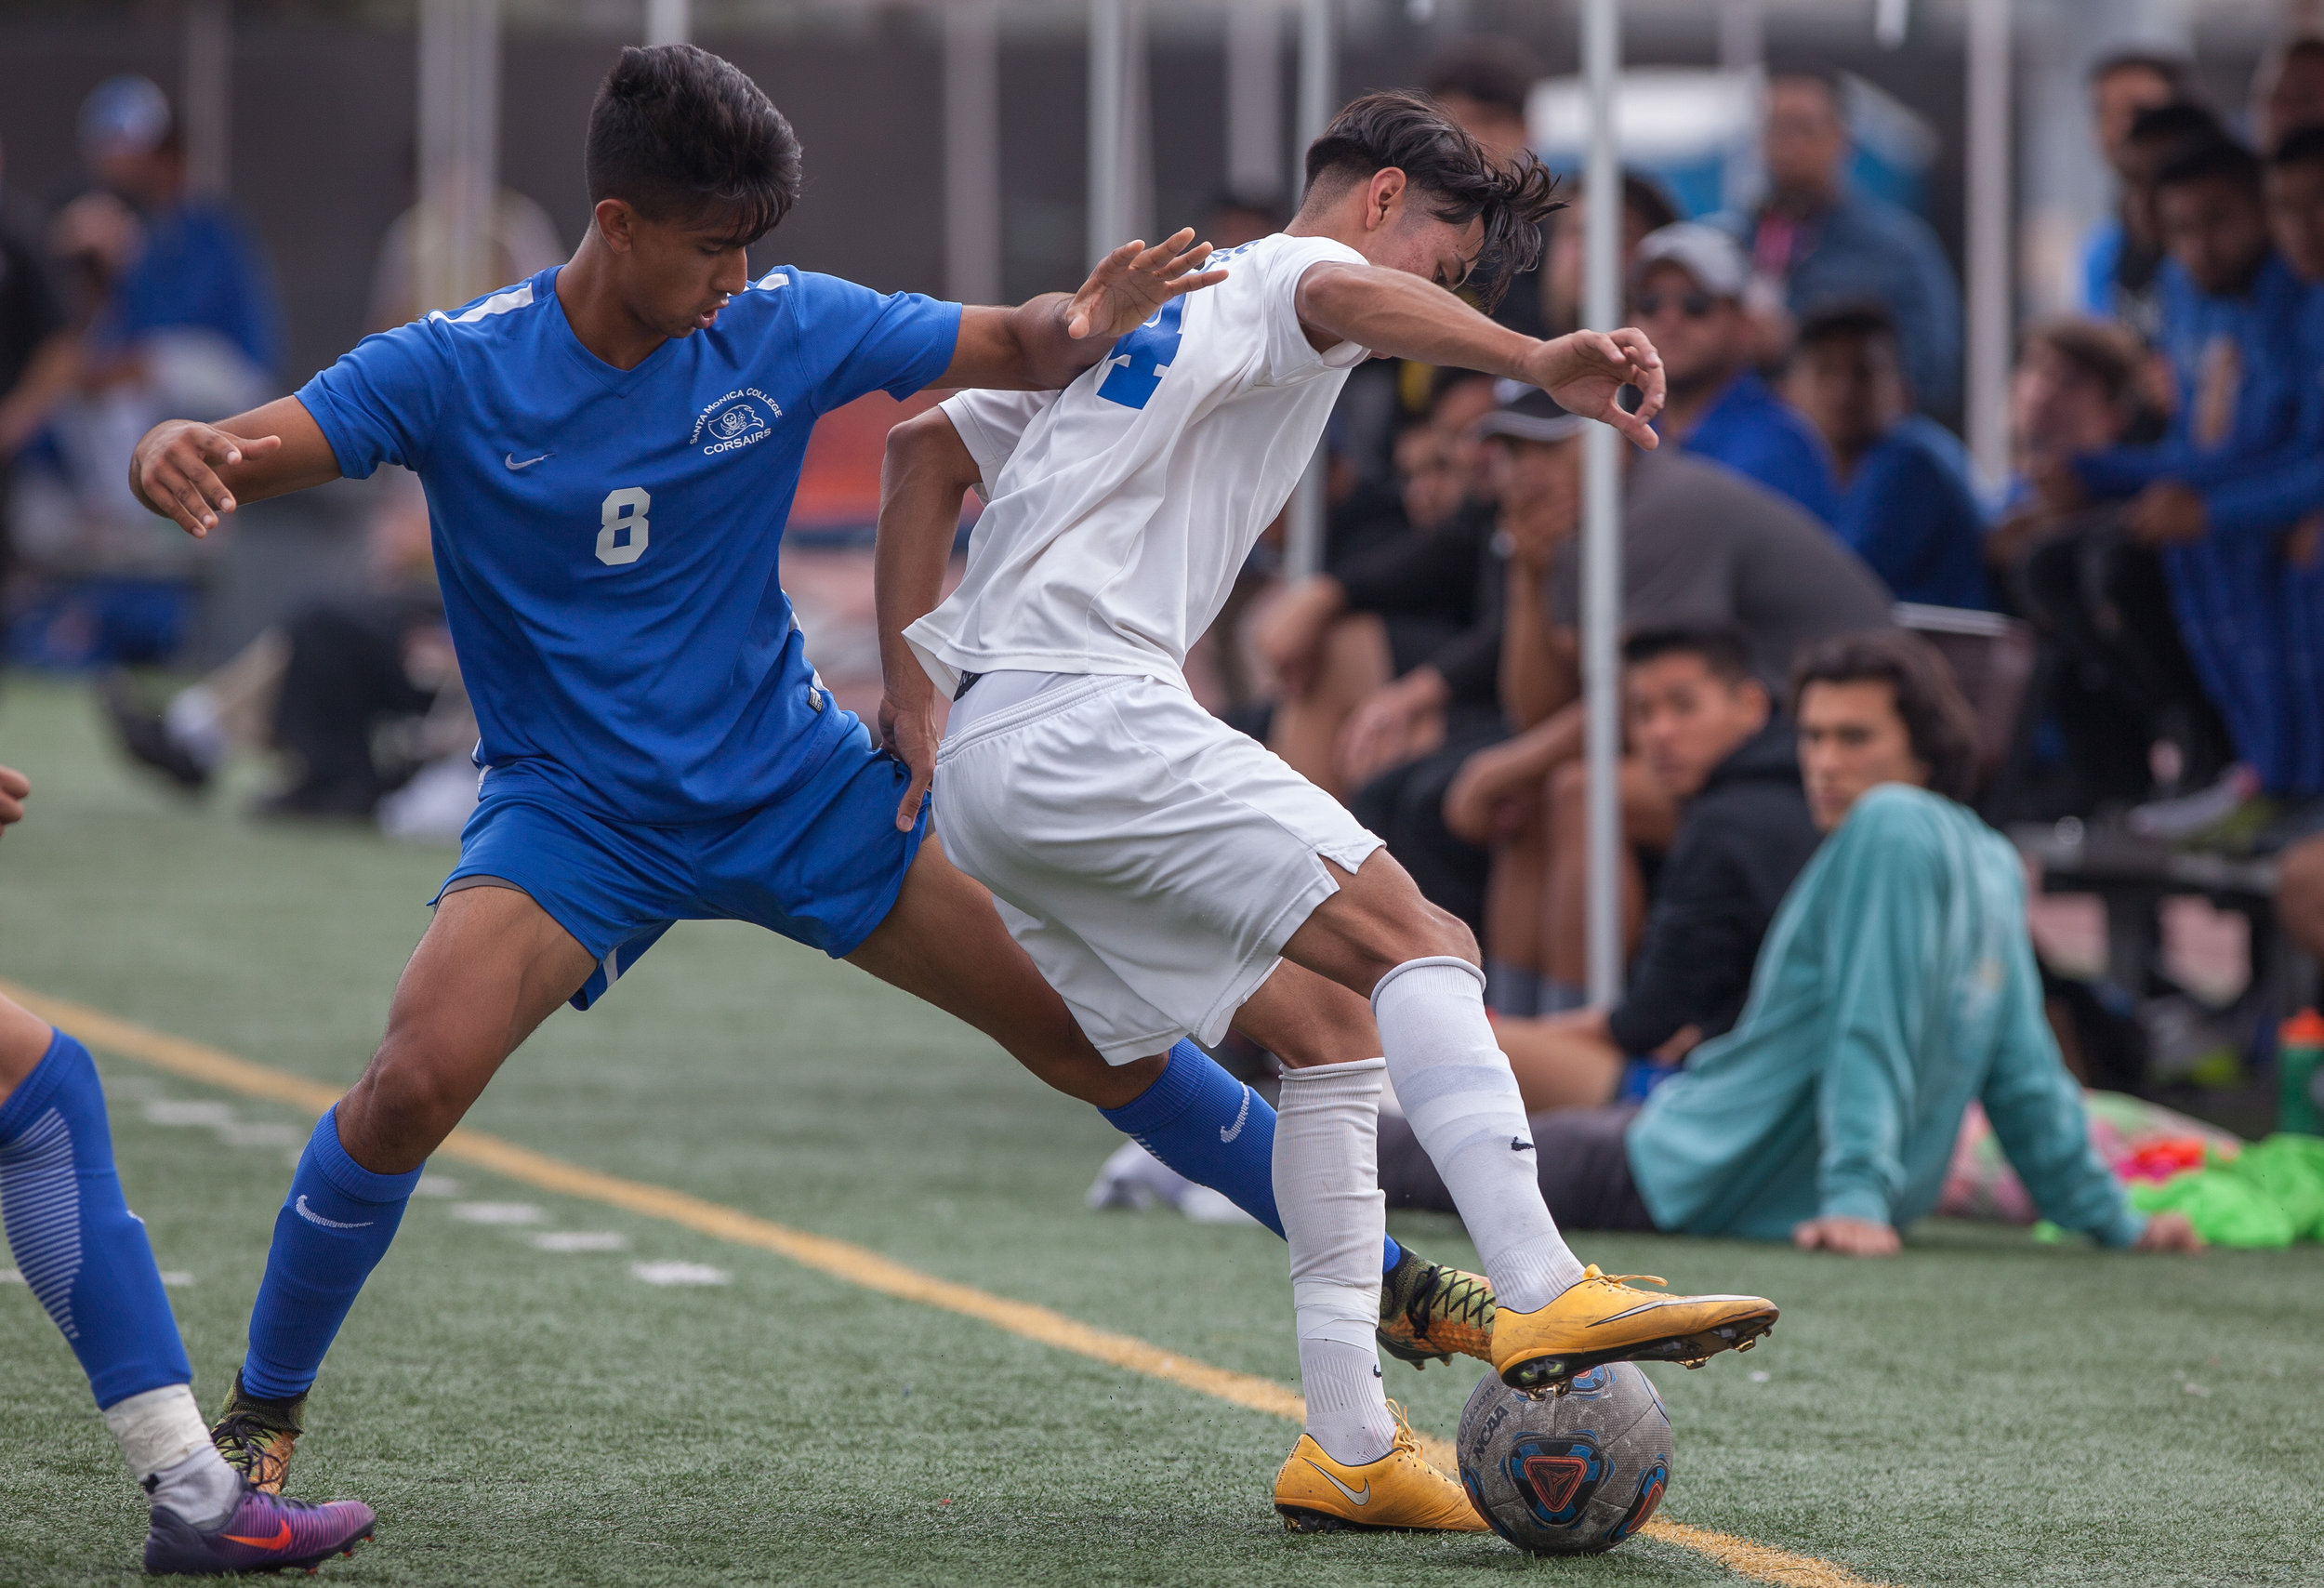  Andy Naidu (8) of the Santa Monica College to withdraw the ball from Eric Pulido (14) of the  Allan Hancock College. The game ended 1-1 resulting in a tie. The game was held at the Corsair Stadium at the Santa Monica College Main Campus in Santa Mon